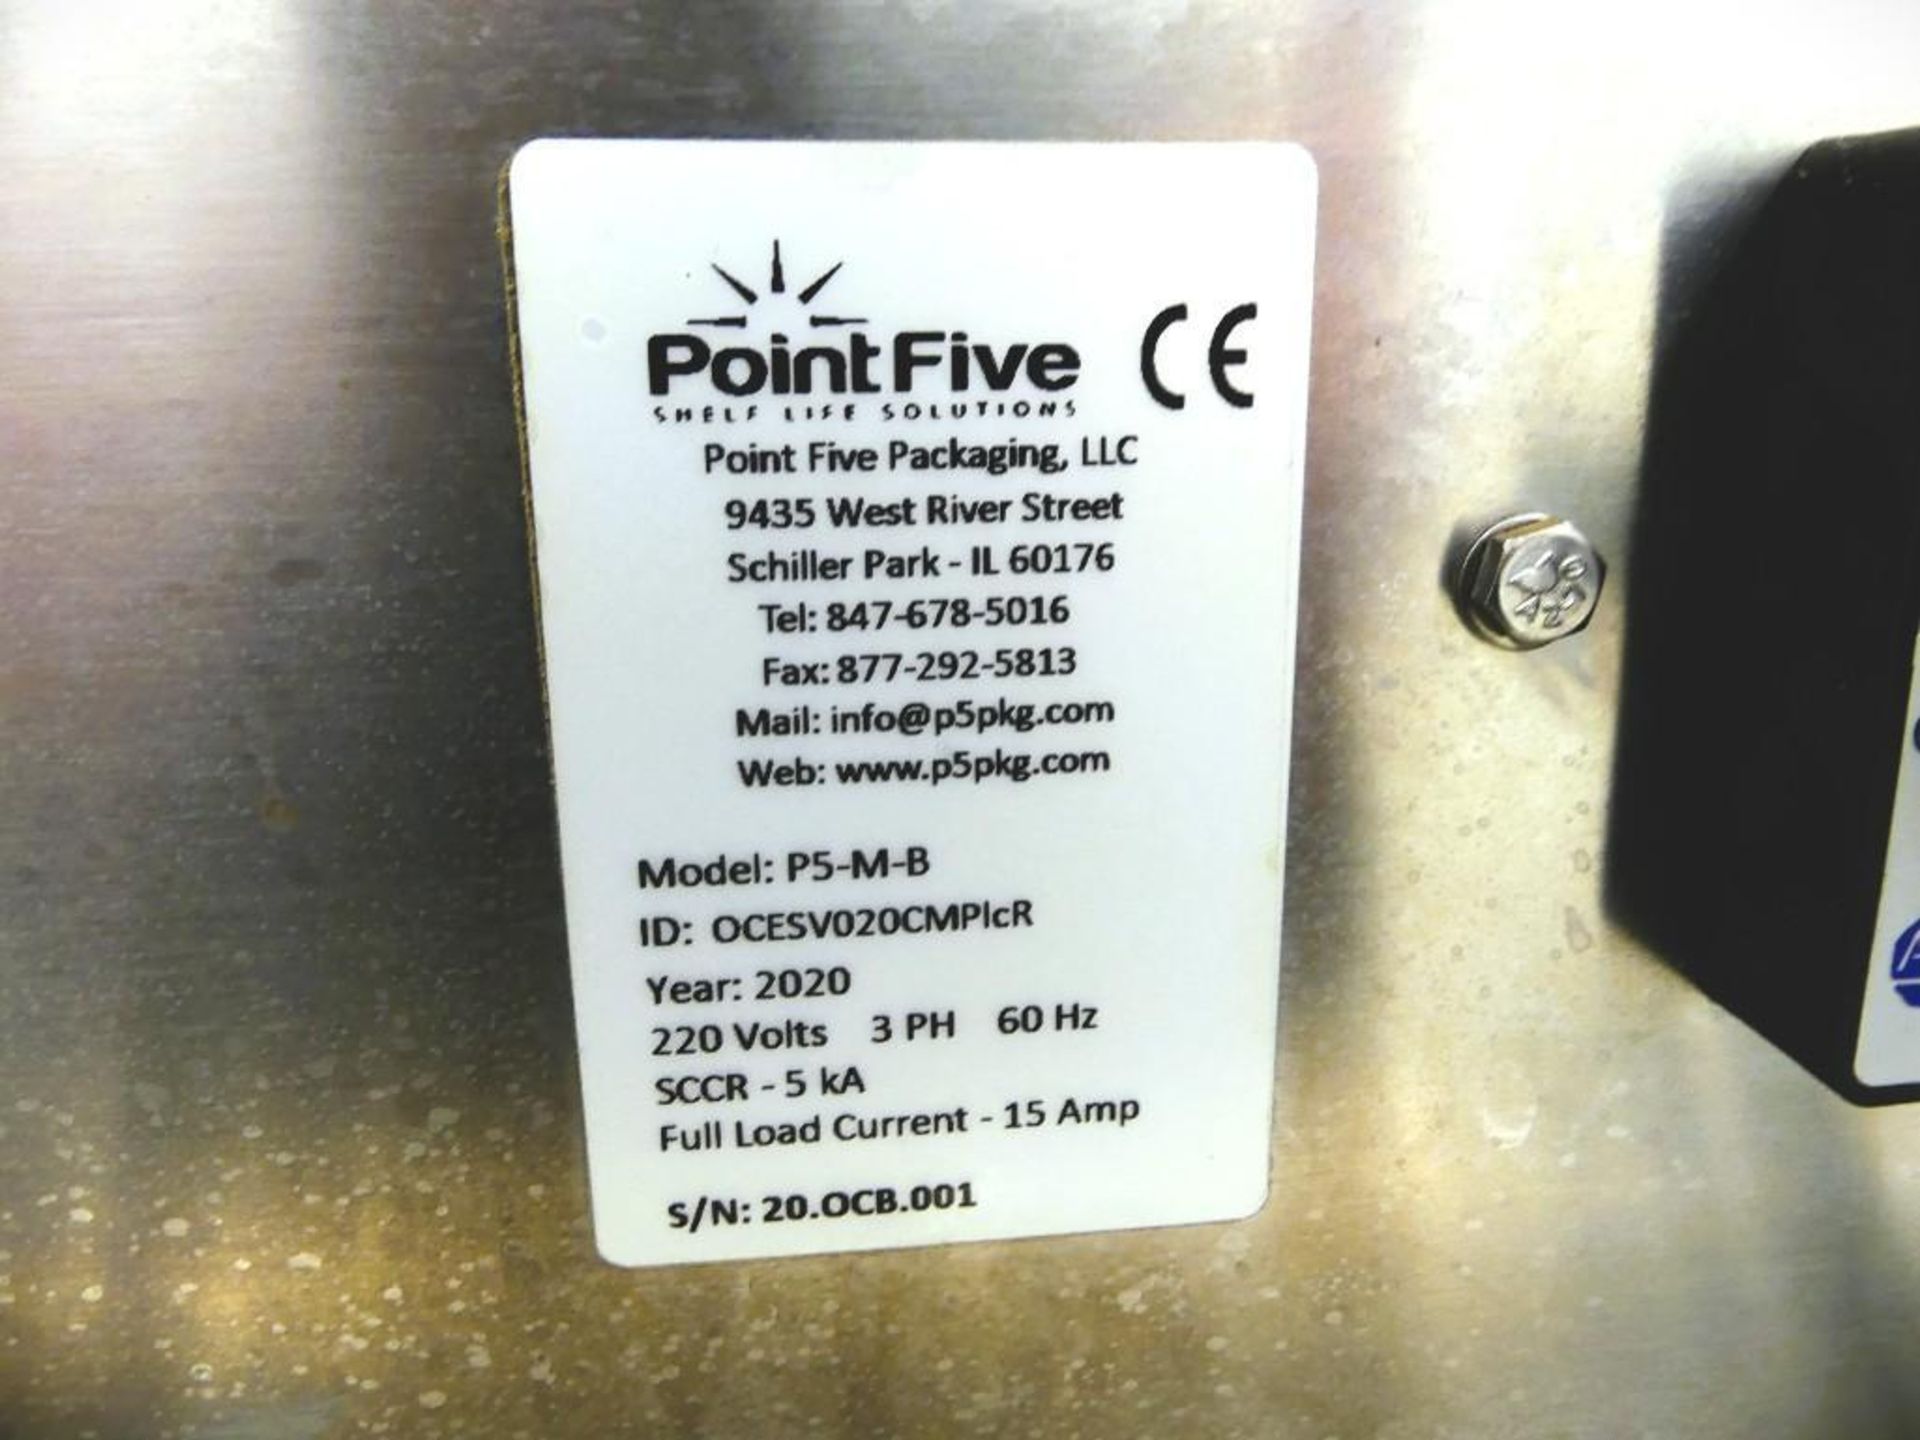 Point Five P5-M-B Semi-Automatic Stainless Steel Tray Sealer - Image 23 of 24